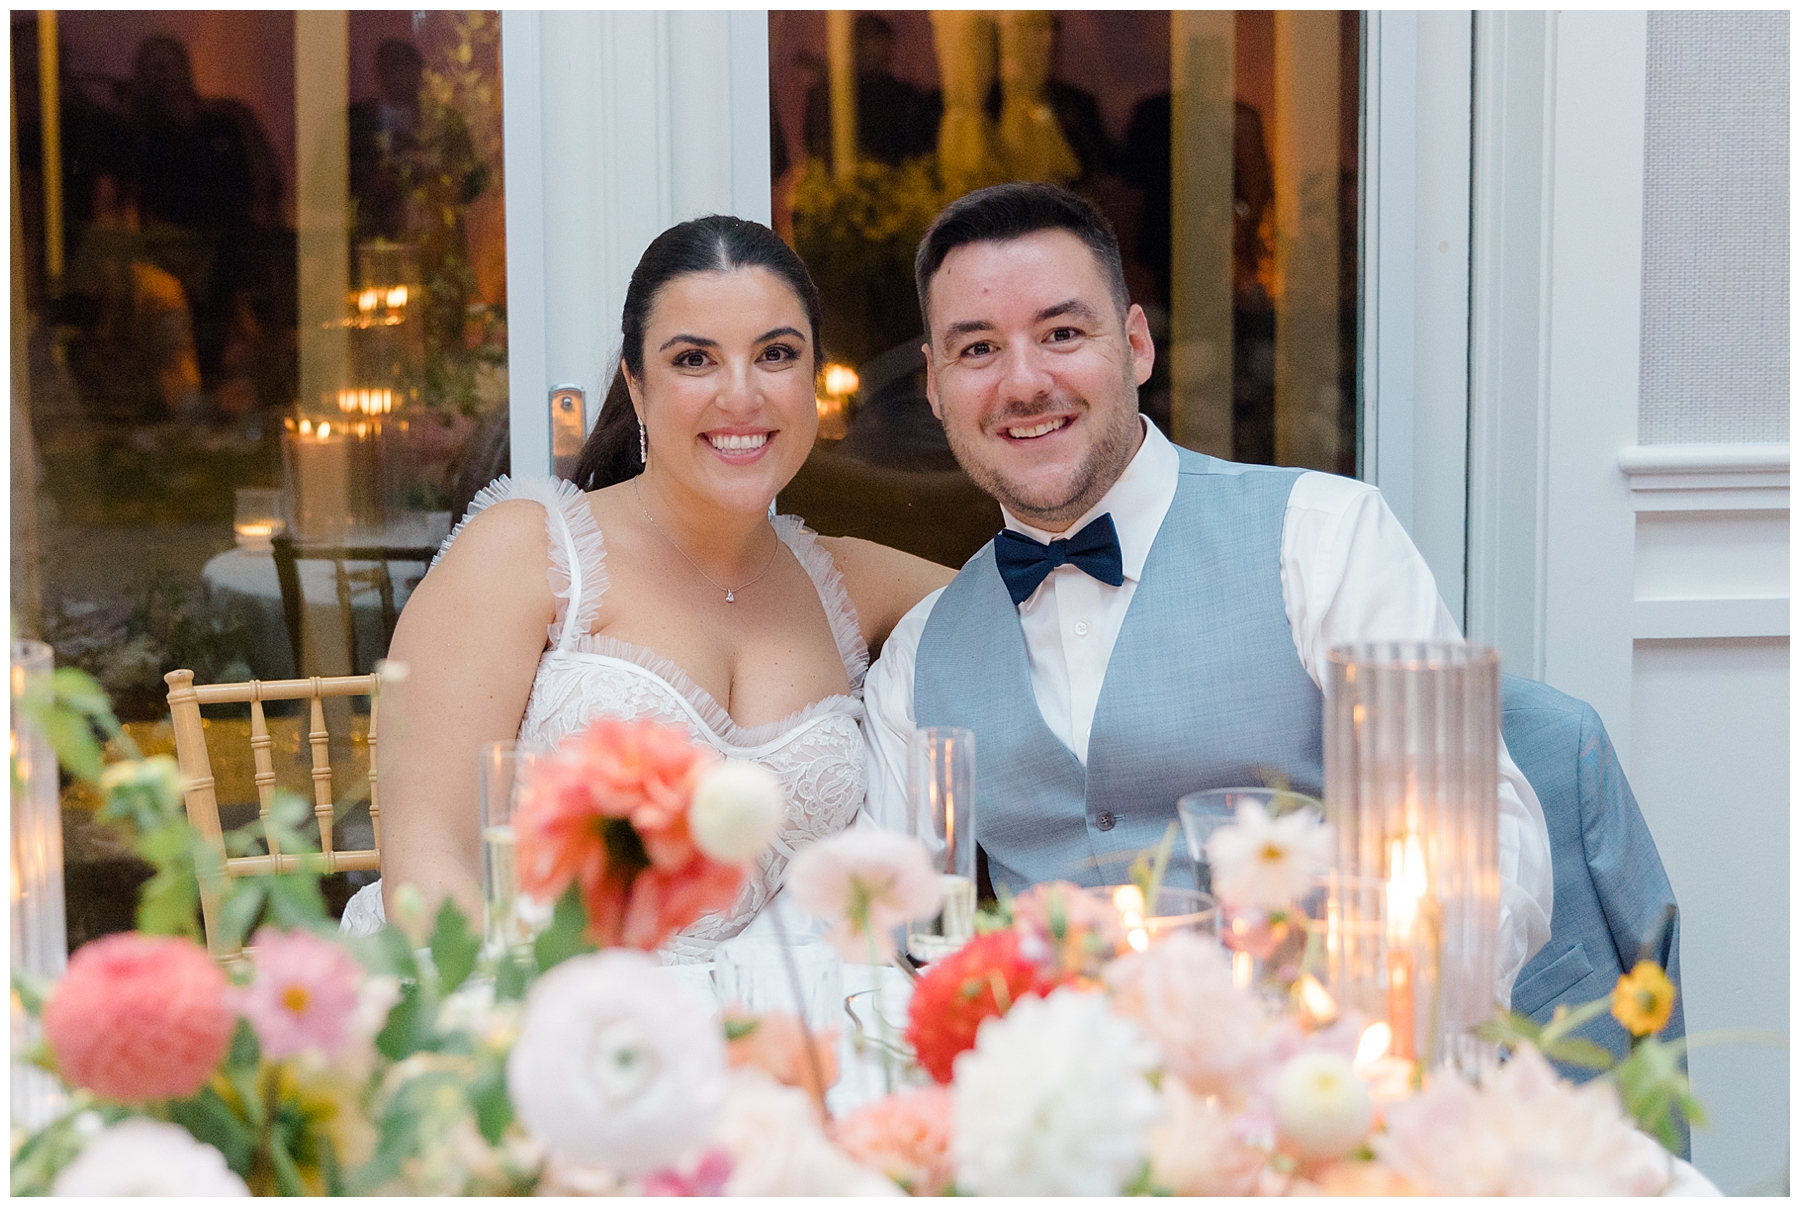 newlyweds at sweetheart table